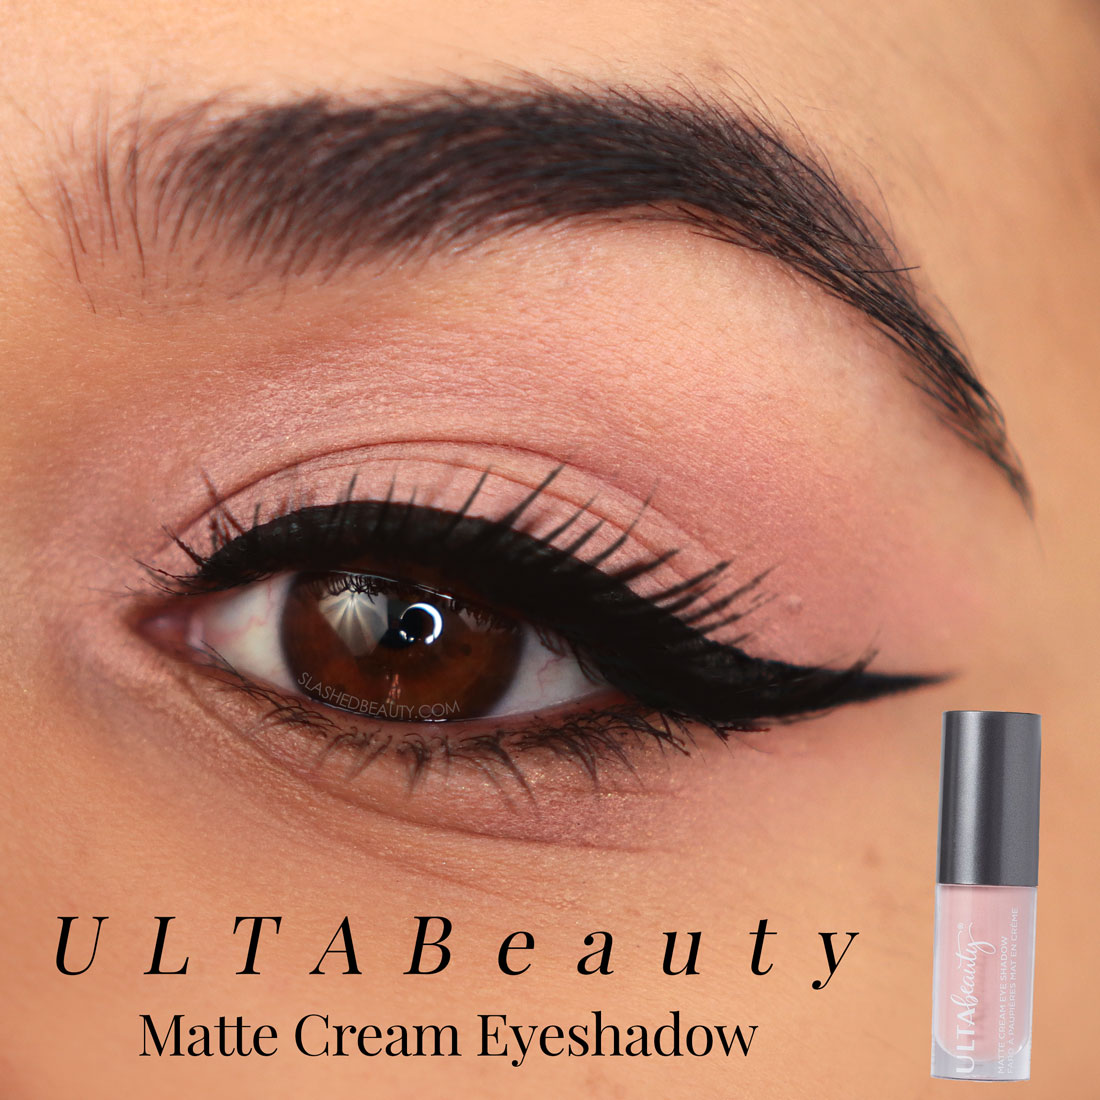 Close up of eye wearing Ulta Beauty Matte Cream Eyeshadow in Flower Child - matte dusty pink | The Best Eyeshadows for One and Done Looks | Slashed Beauty